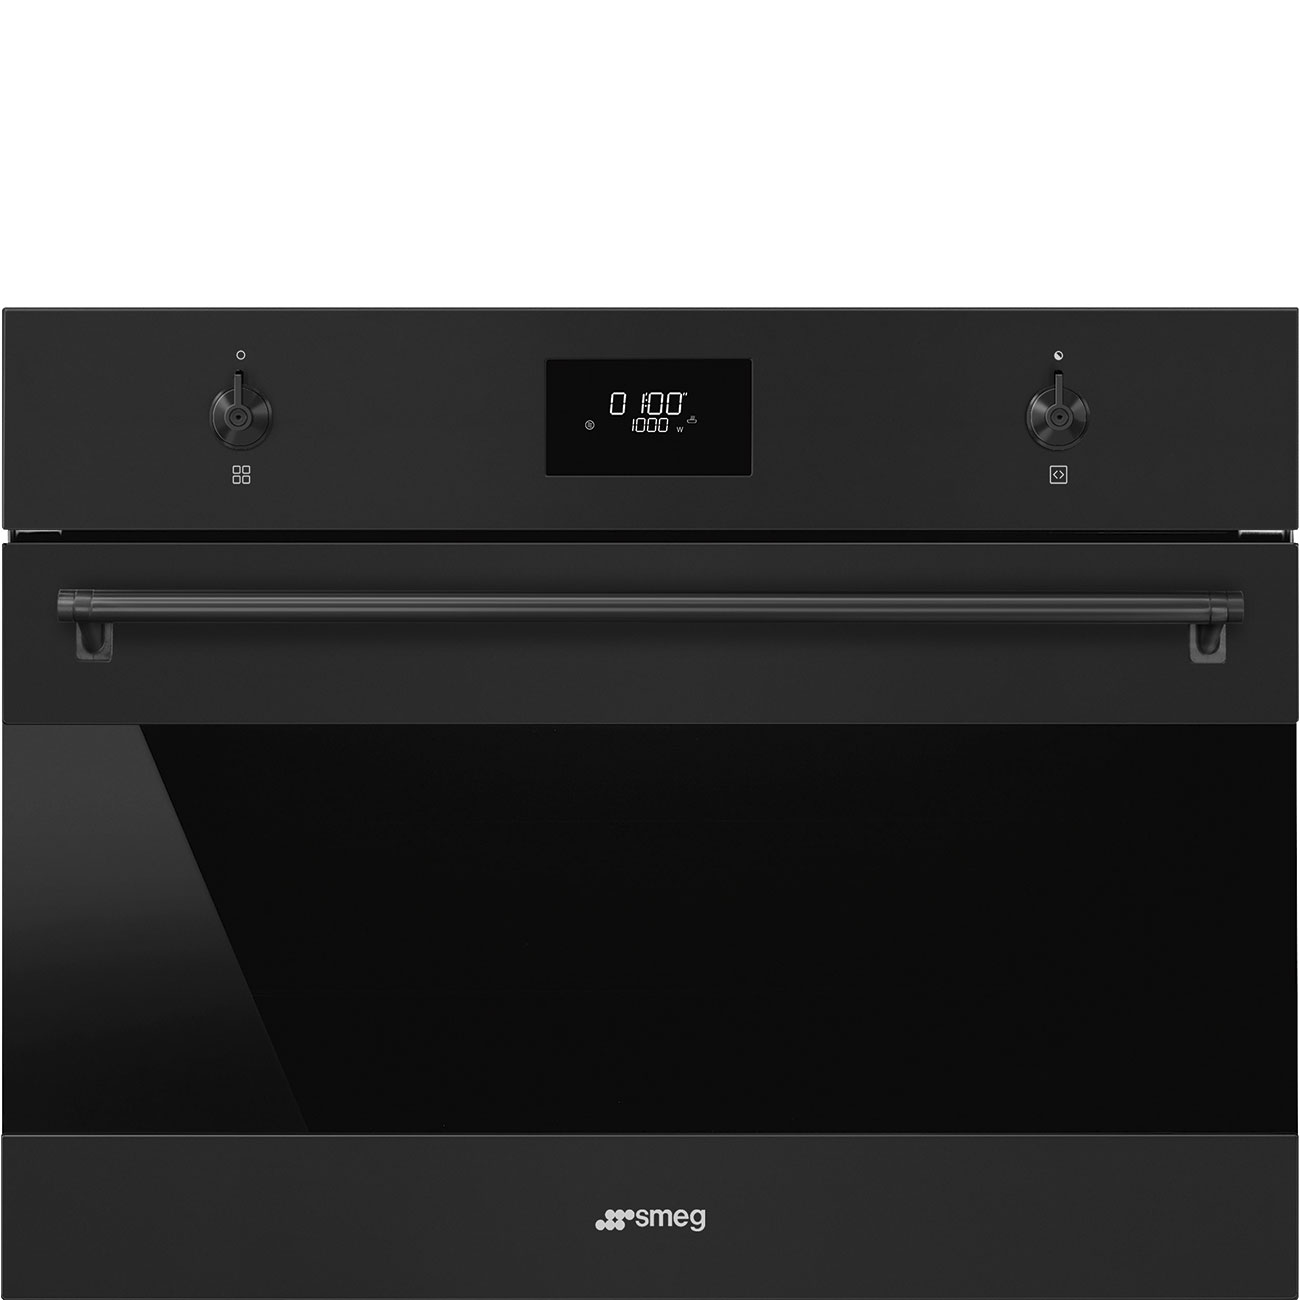 Black Micro + grill Galileo Oven.  45cm compact. Built-in. Smeg_1